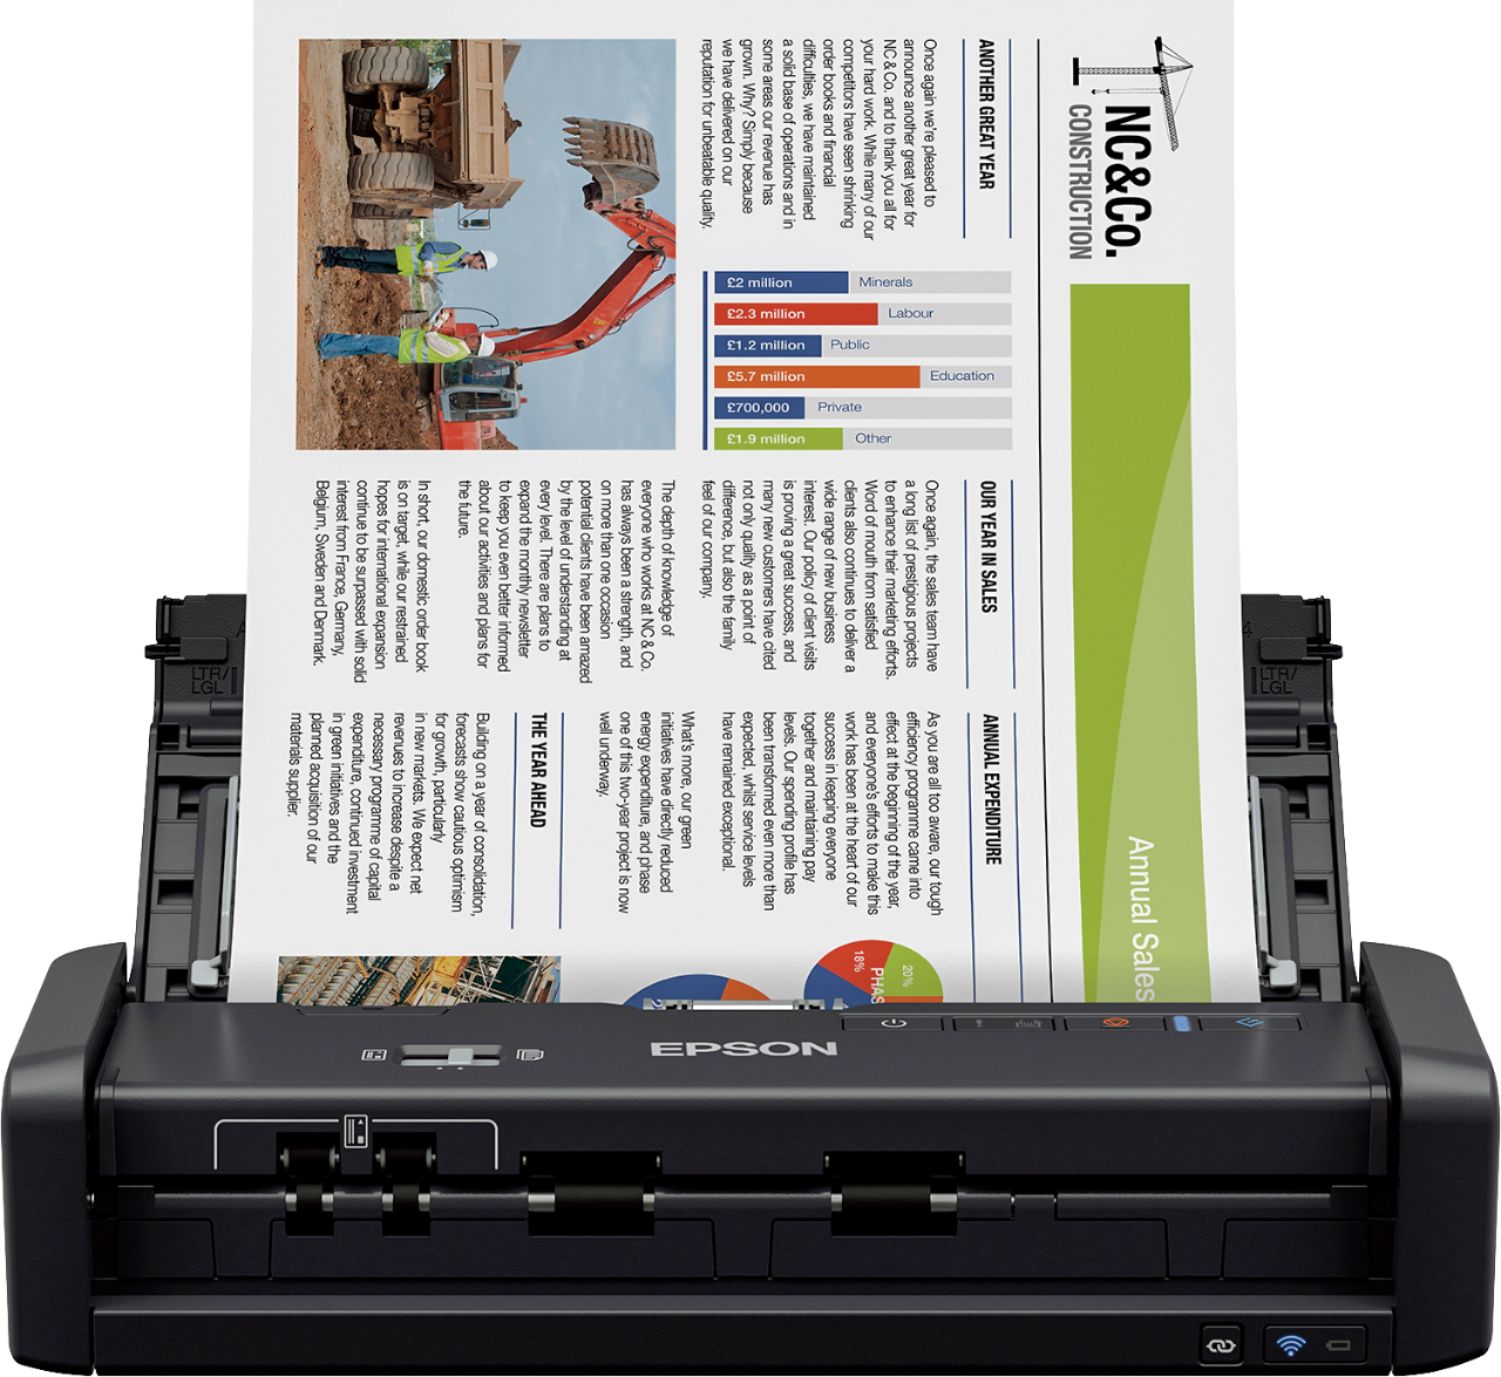 Epson ES-60W Wireless Mobile Color Sheetfed Document Scanner Black  B11B253201 - Best Buy